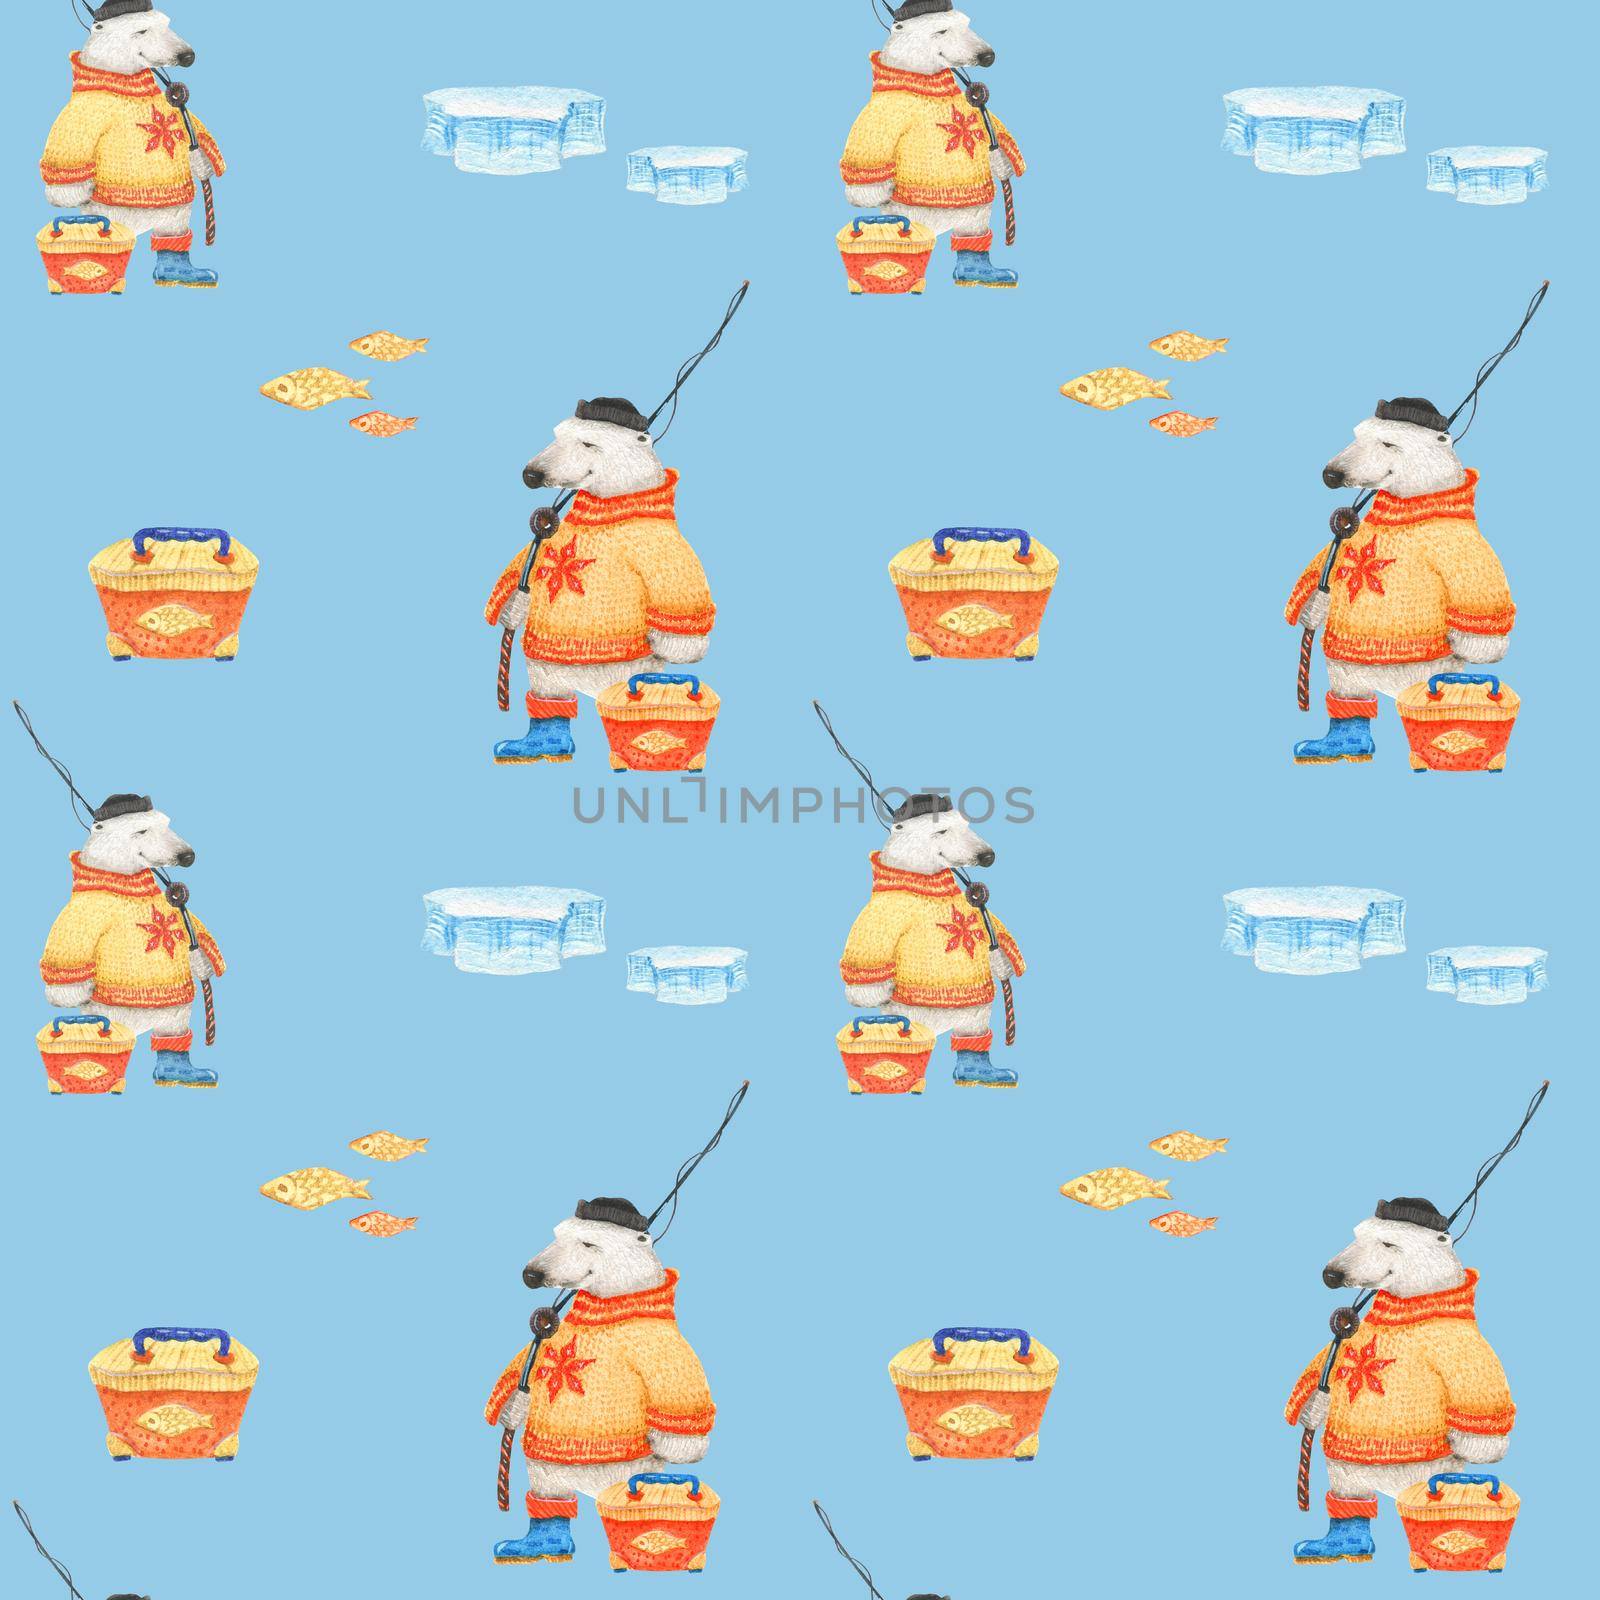 Fisher Polar bear outdoor. Watercolor seamless pattern by Xeniasnowstorm